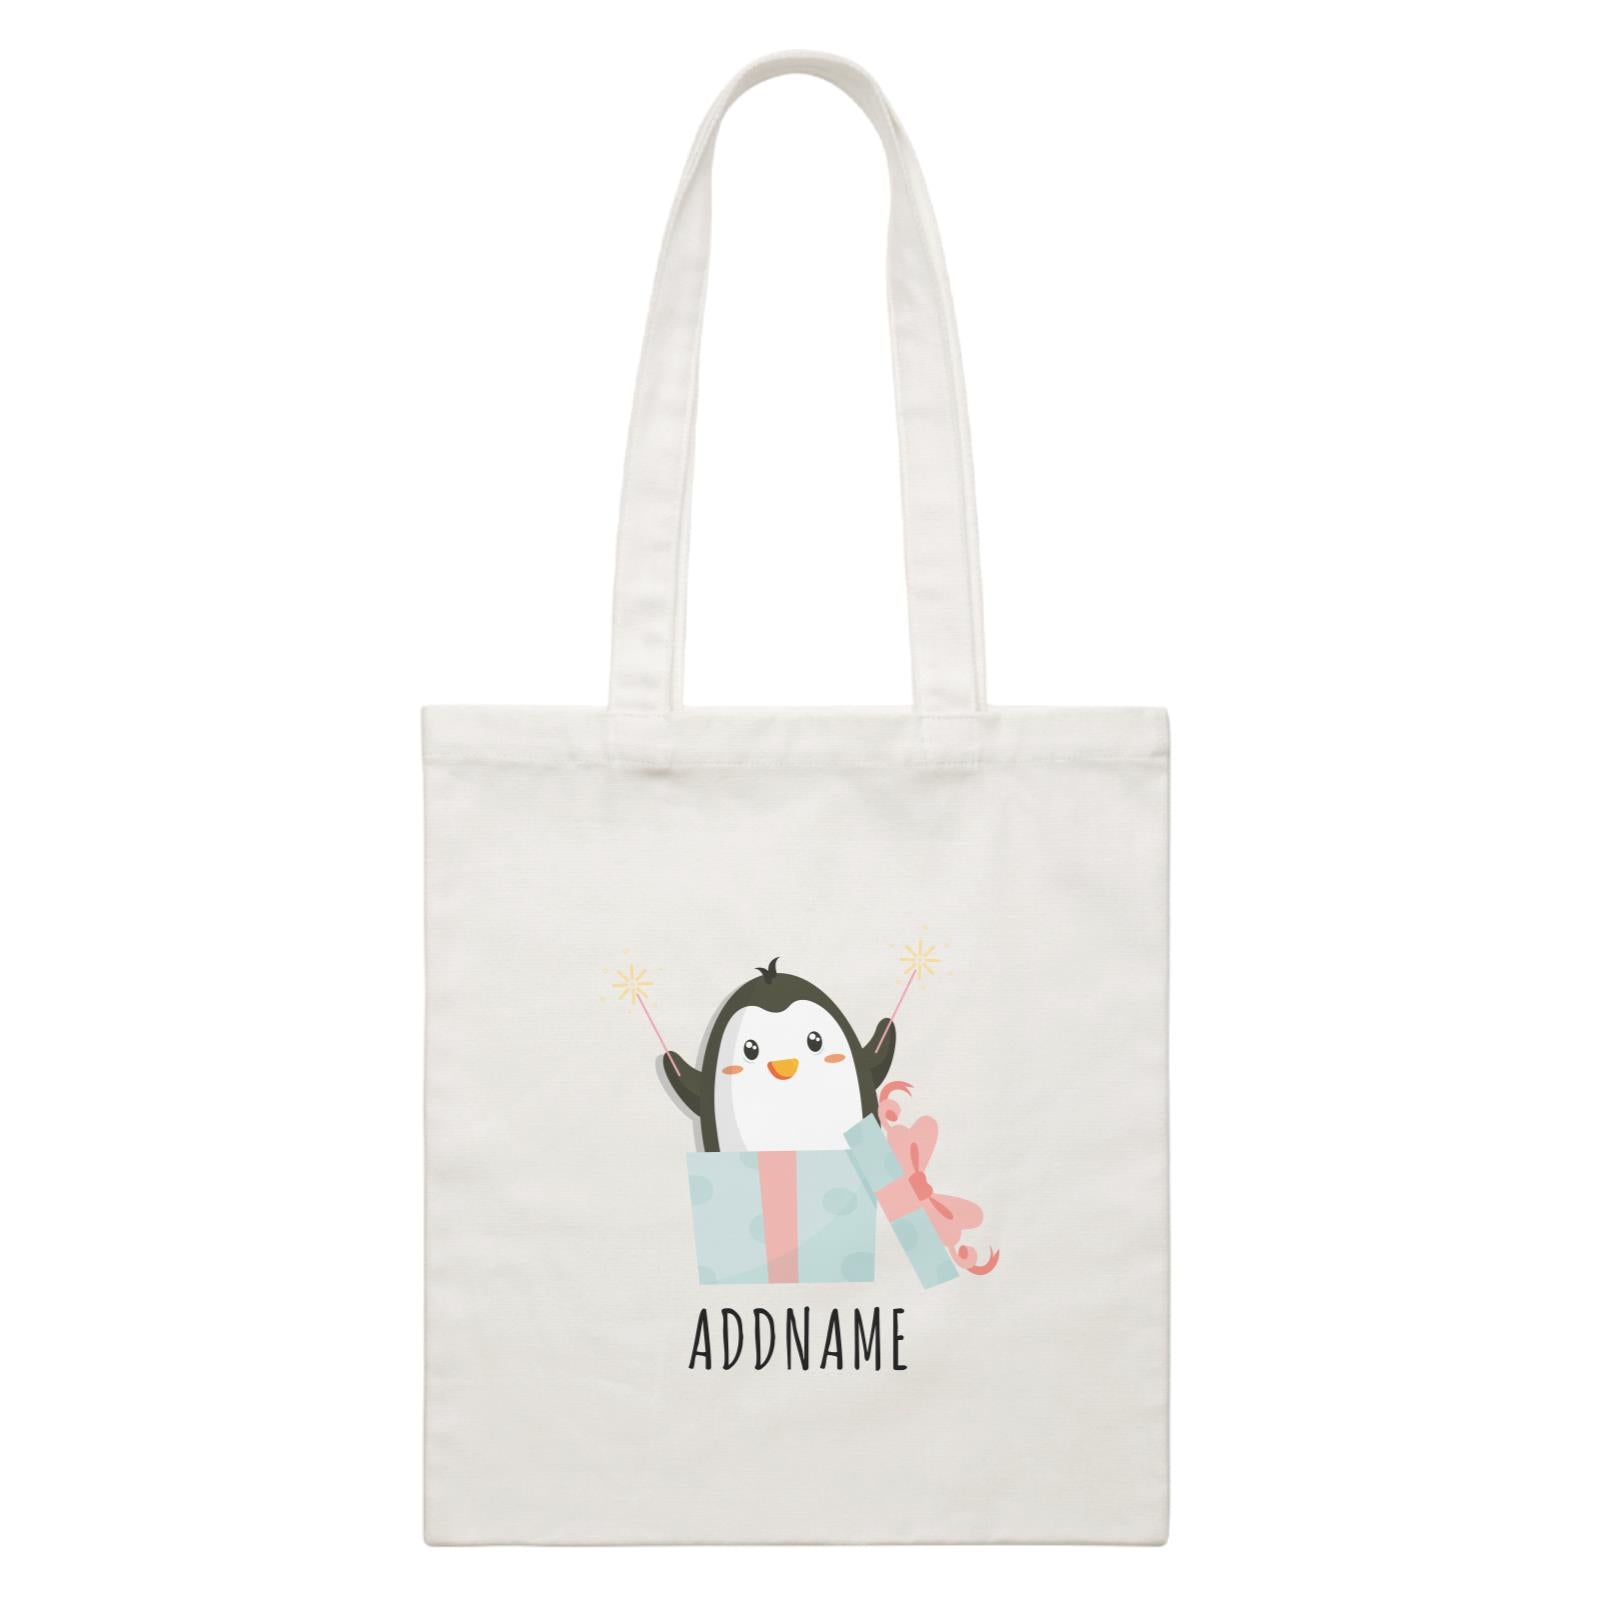 Birthday Cute Penguin Taking Fireworks In Present Box Addname White Canvas Bag